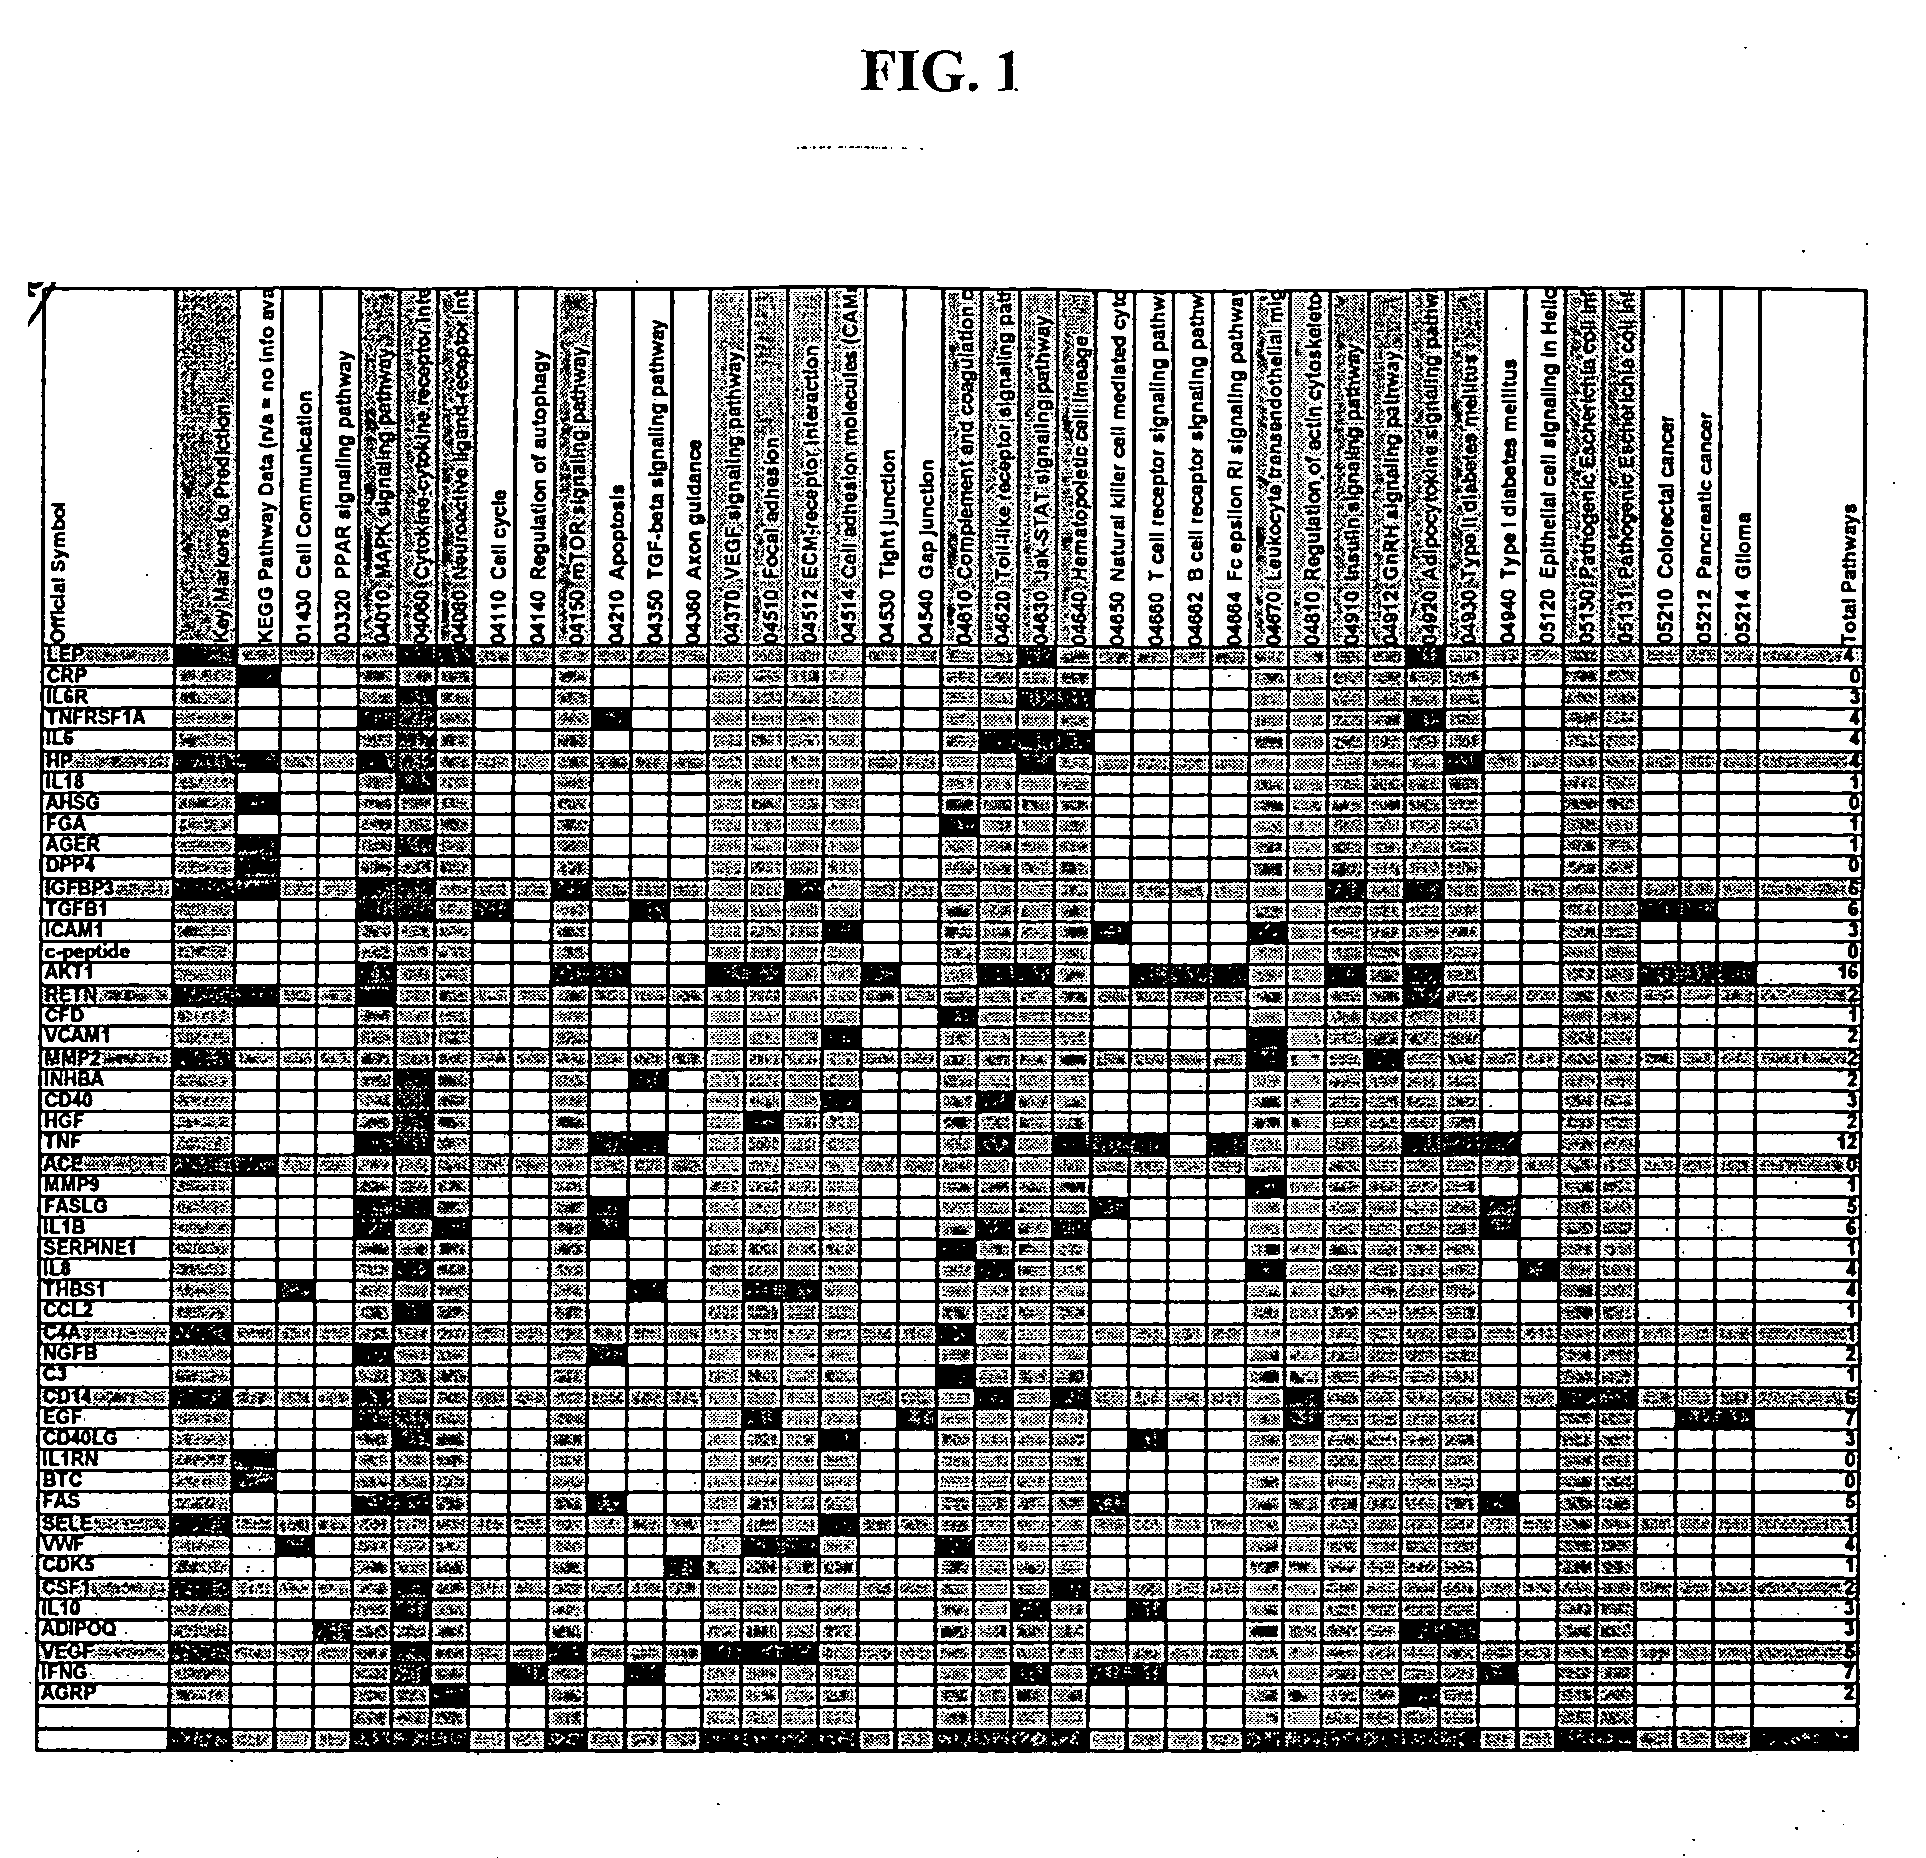 Diabetes-associated markers and methods of use thereof